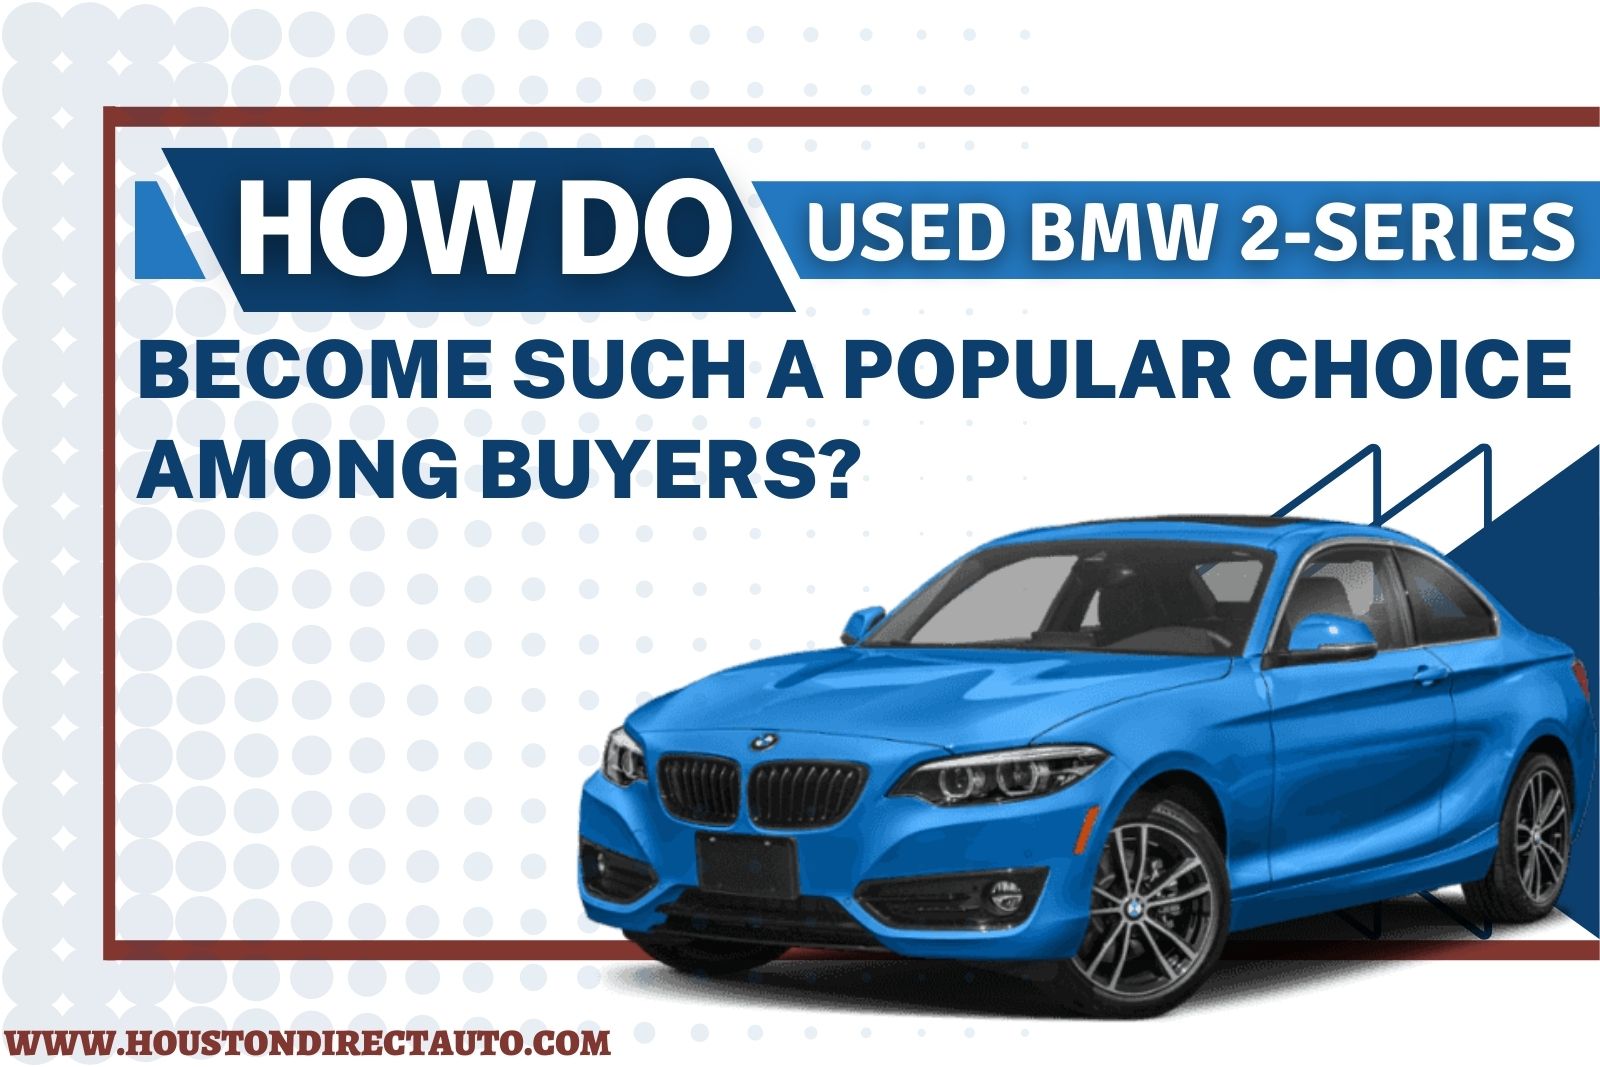 Certified Used BMW In Houston TX, Used BMW For Sale Near Me In Houston TX, BMW Cars For Sale In Houston TX, BMW Used Cars In Houston TX, Used BMW For Sale In Houston TX